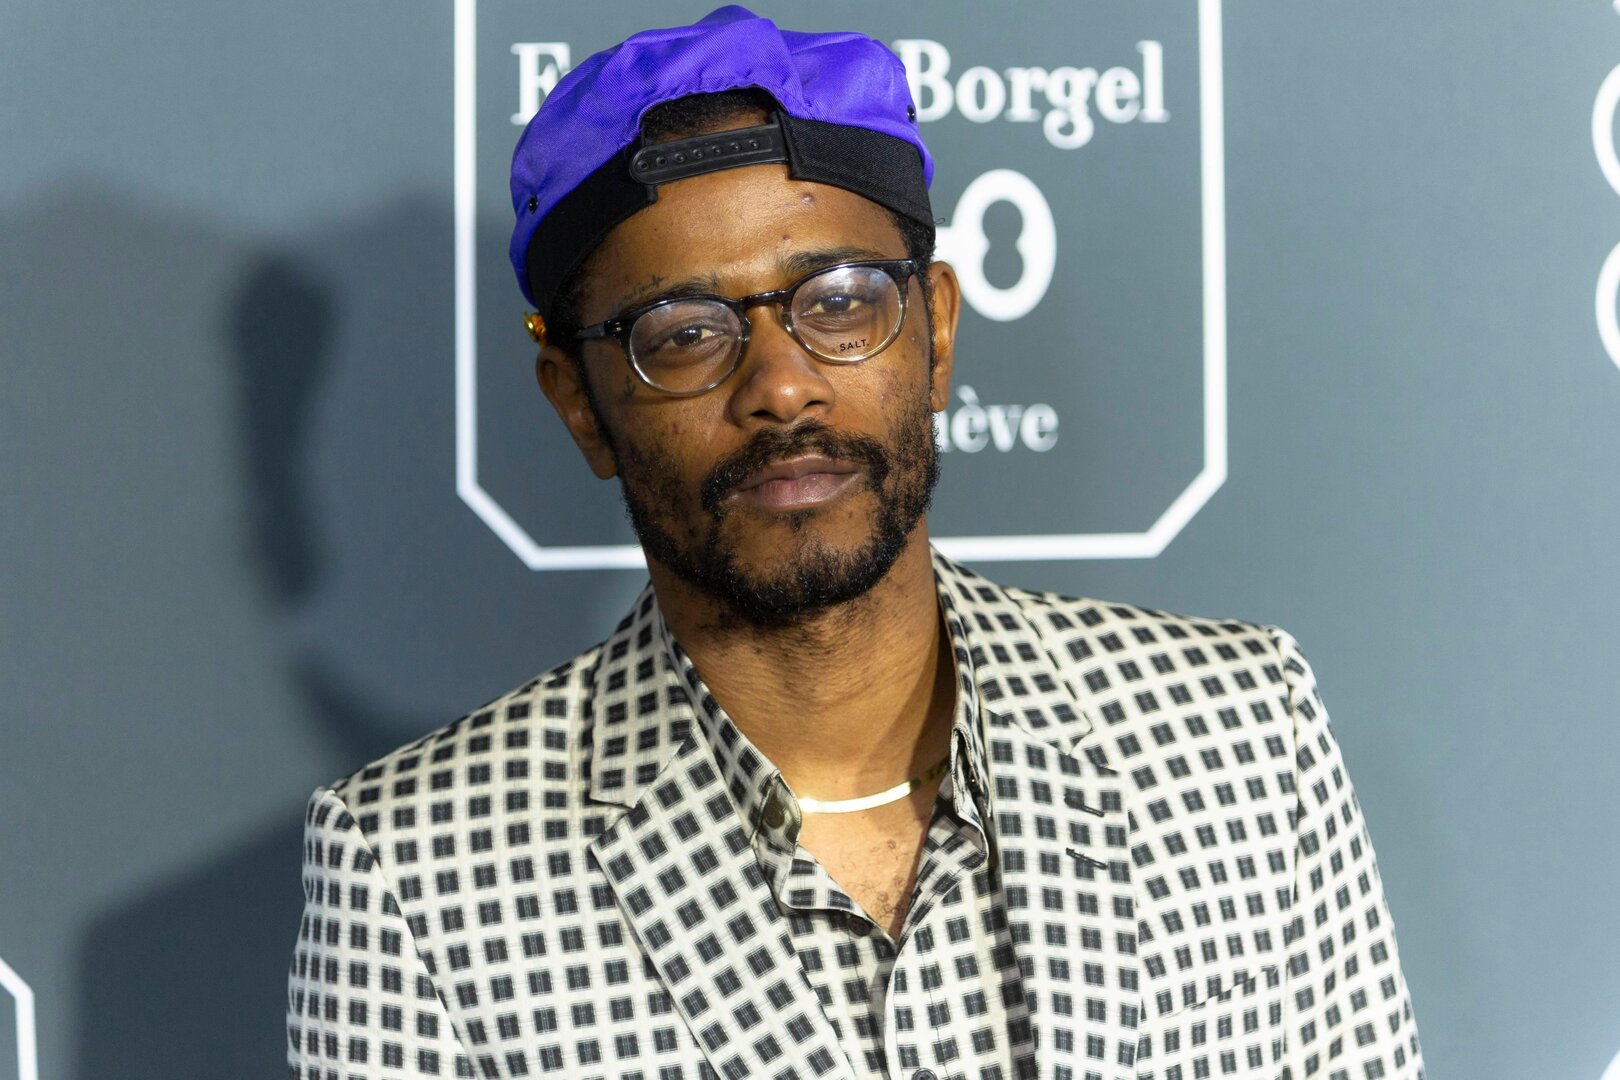 LaKeith Stanfield: biography, personal life, filmography.